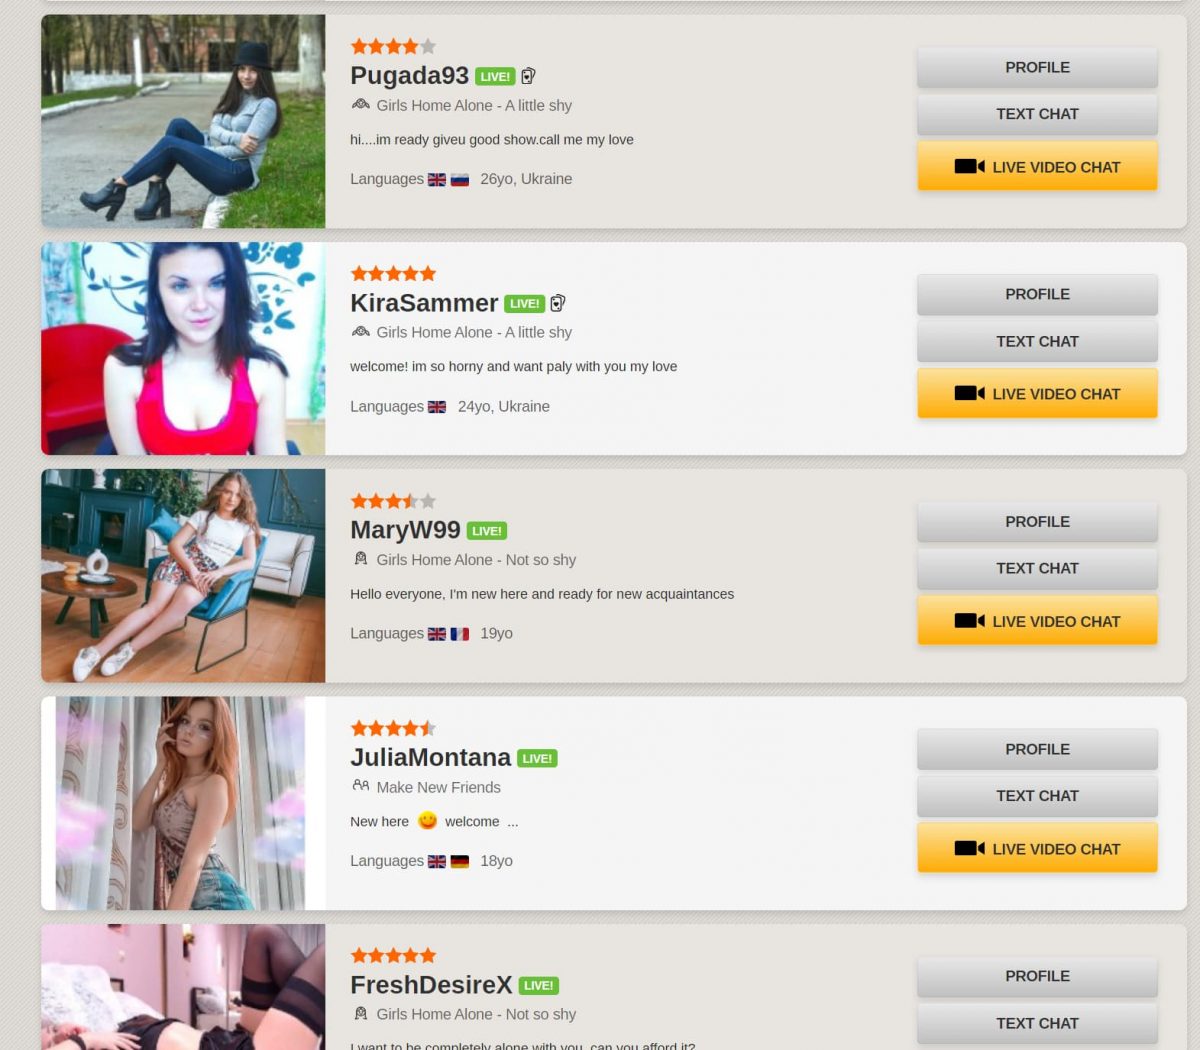 list of camcontacts camgirls with some from Ukraine